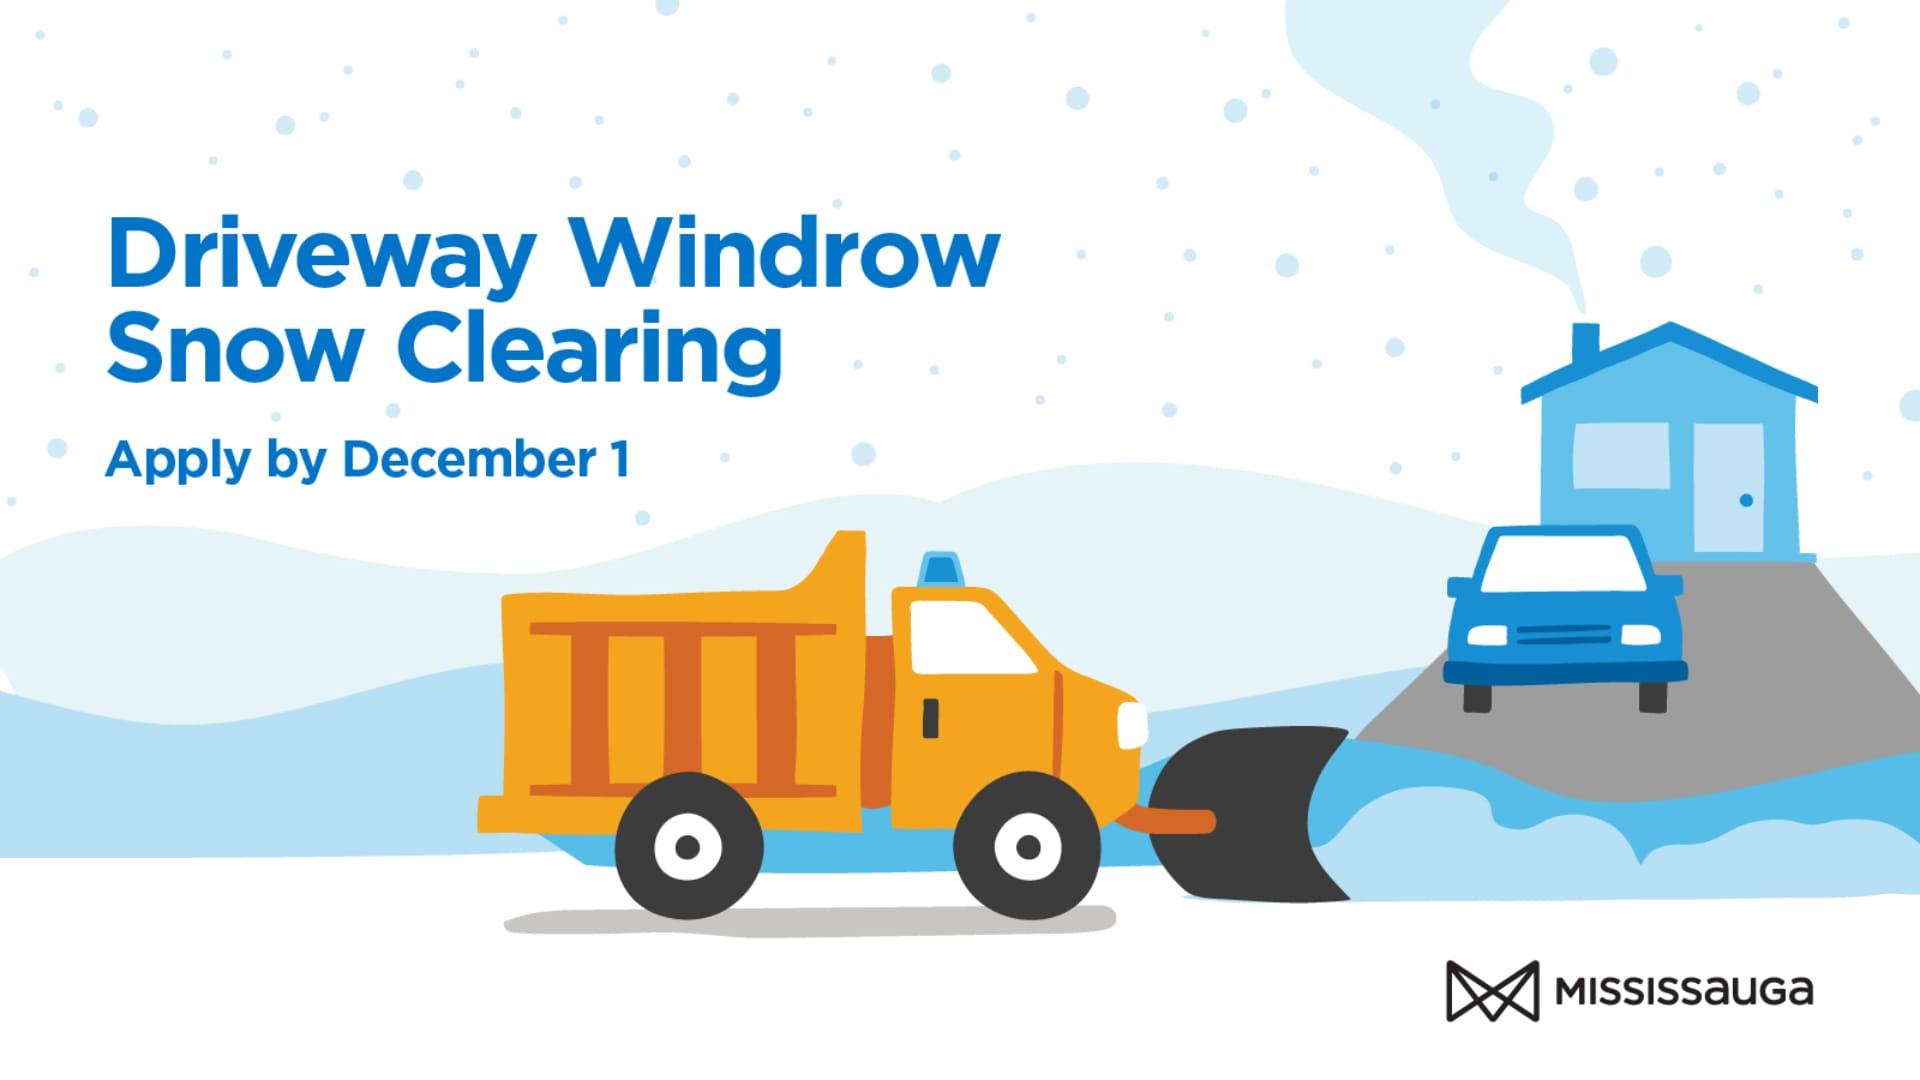 Get ahead of winter weather and apply for the Driveway Windrow Snow Clearing Program